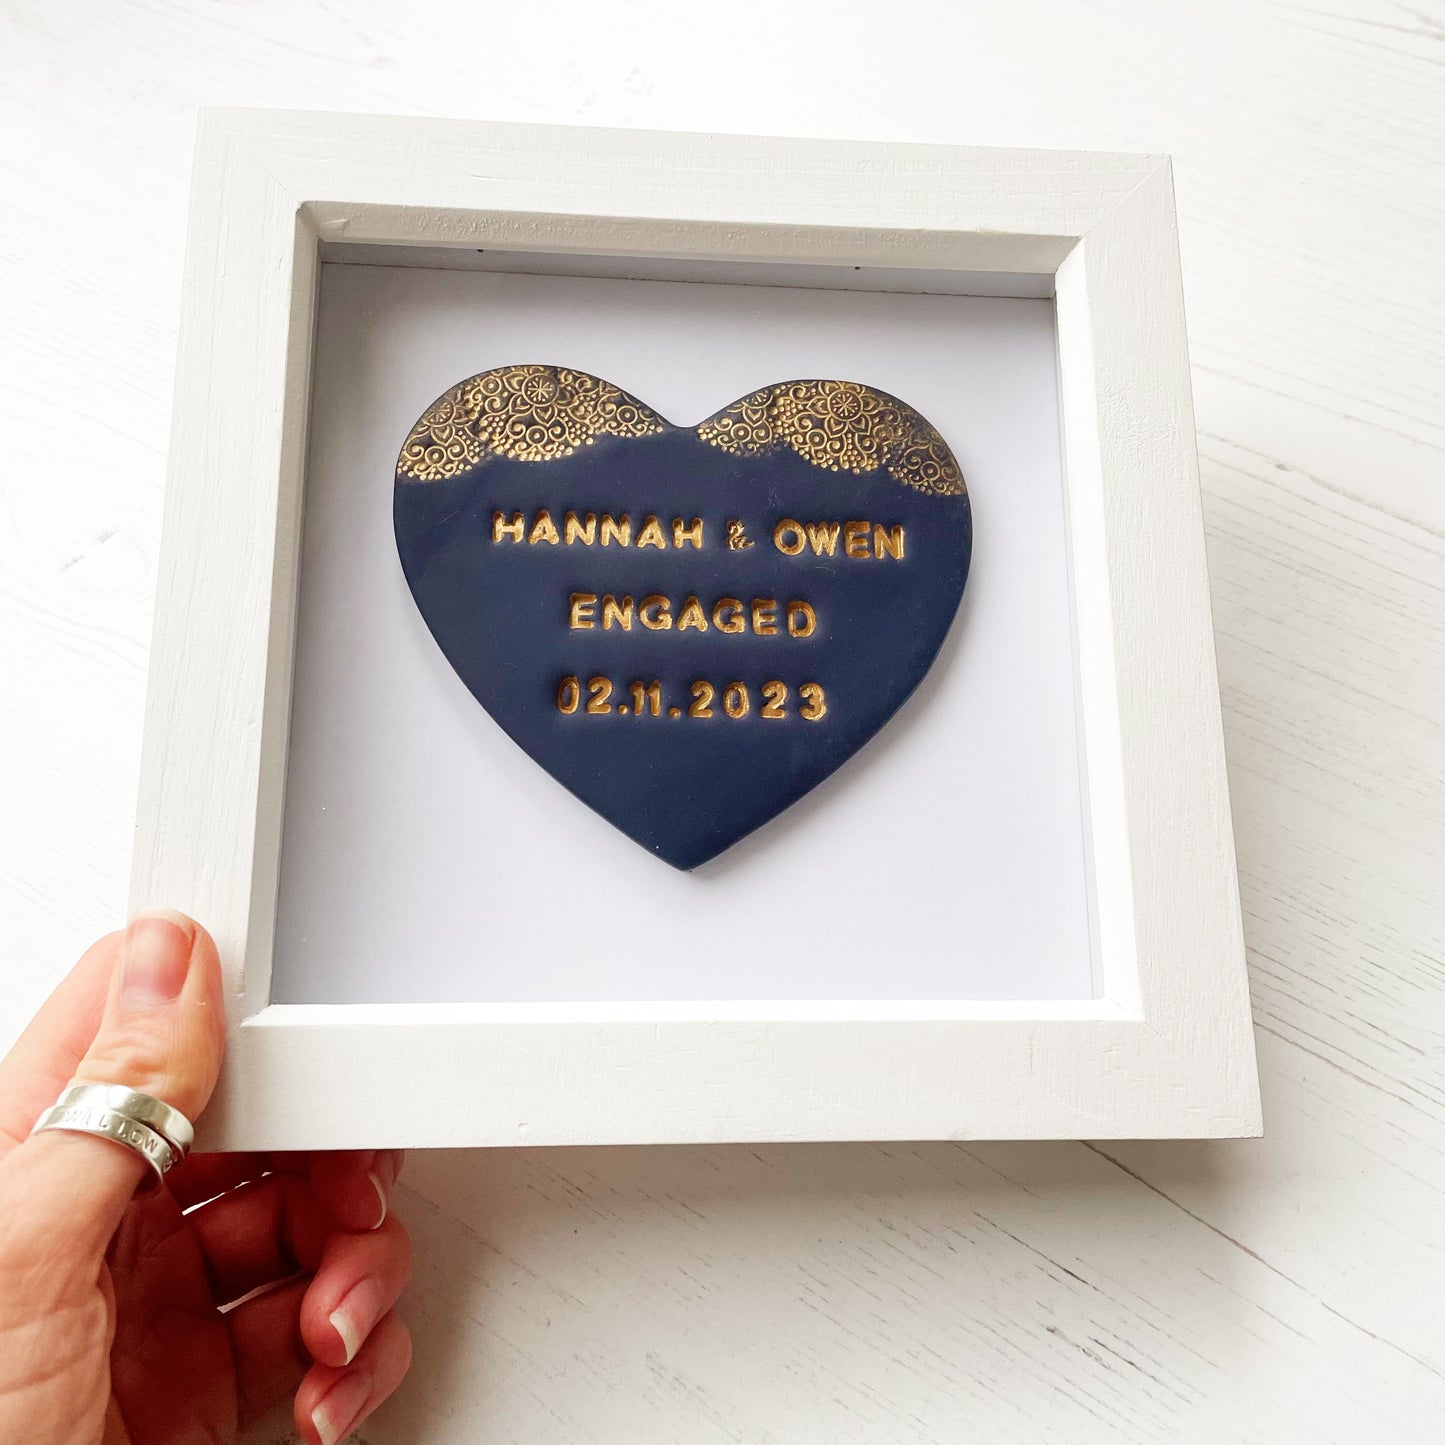 Personalised framed engagement gift, dark blue clay heart with a gold lace edge at the top of the heart in a white box frame, the heart is personalised with HANNAH & OWEN ENGAGED 02.11.2023